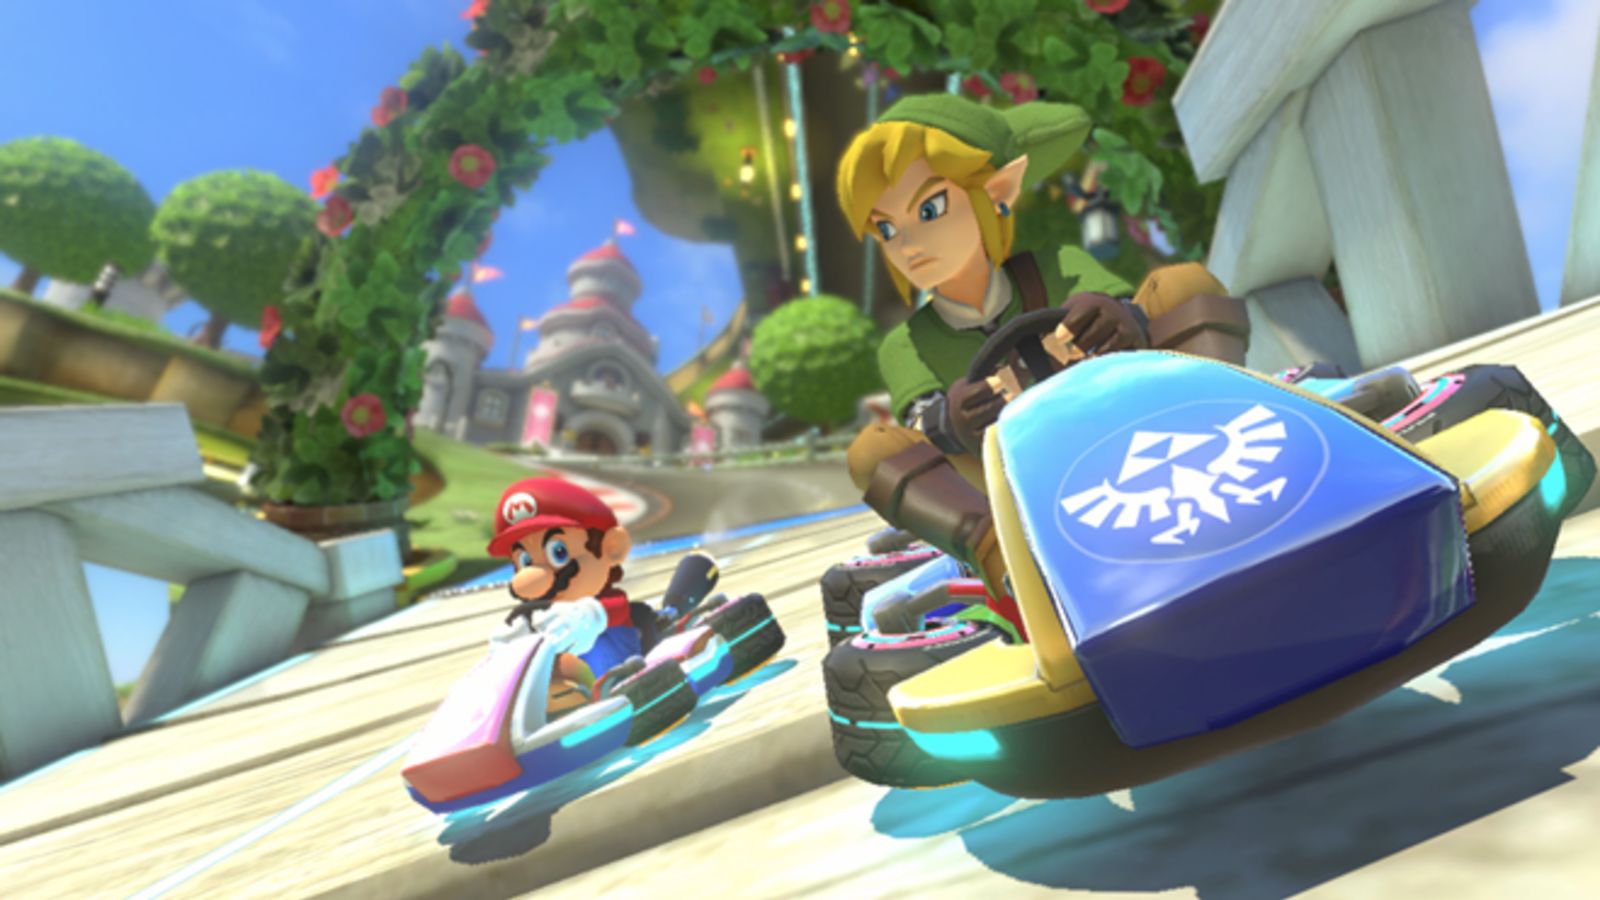 Illustration for article titled Awesome Mario Kart 8 DLC is coming